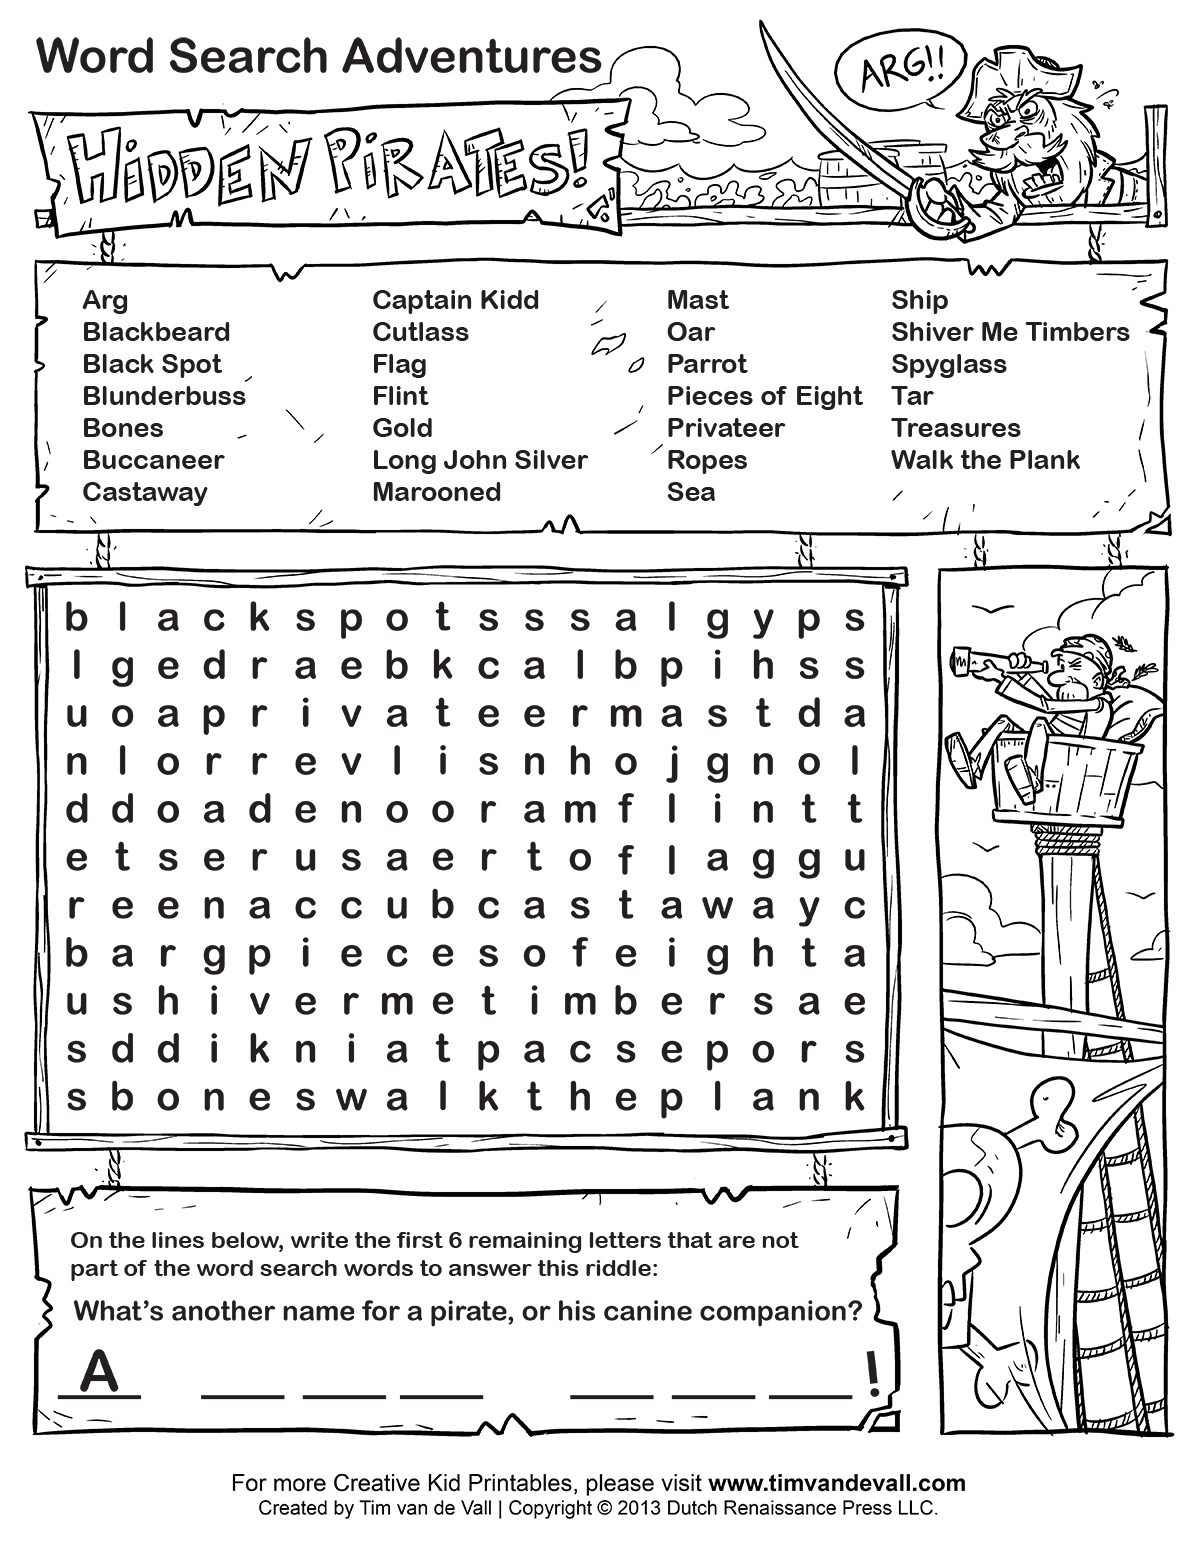 Free Printable Word Searches For Kids - Free Printable Word Searches For Middle School Students